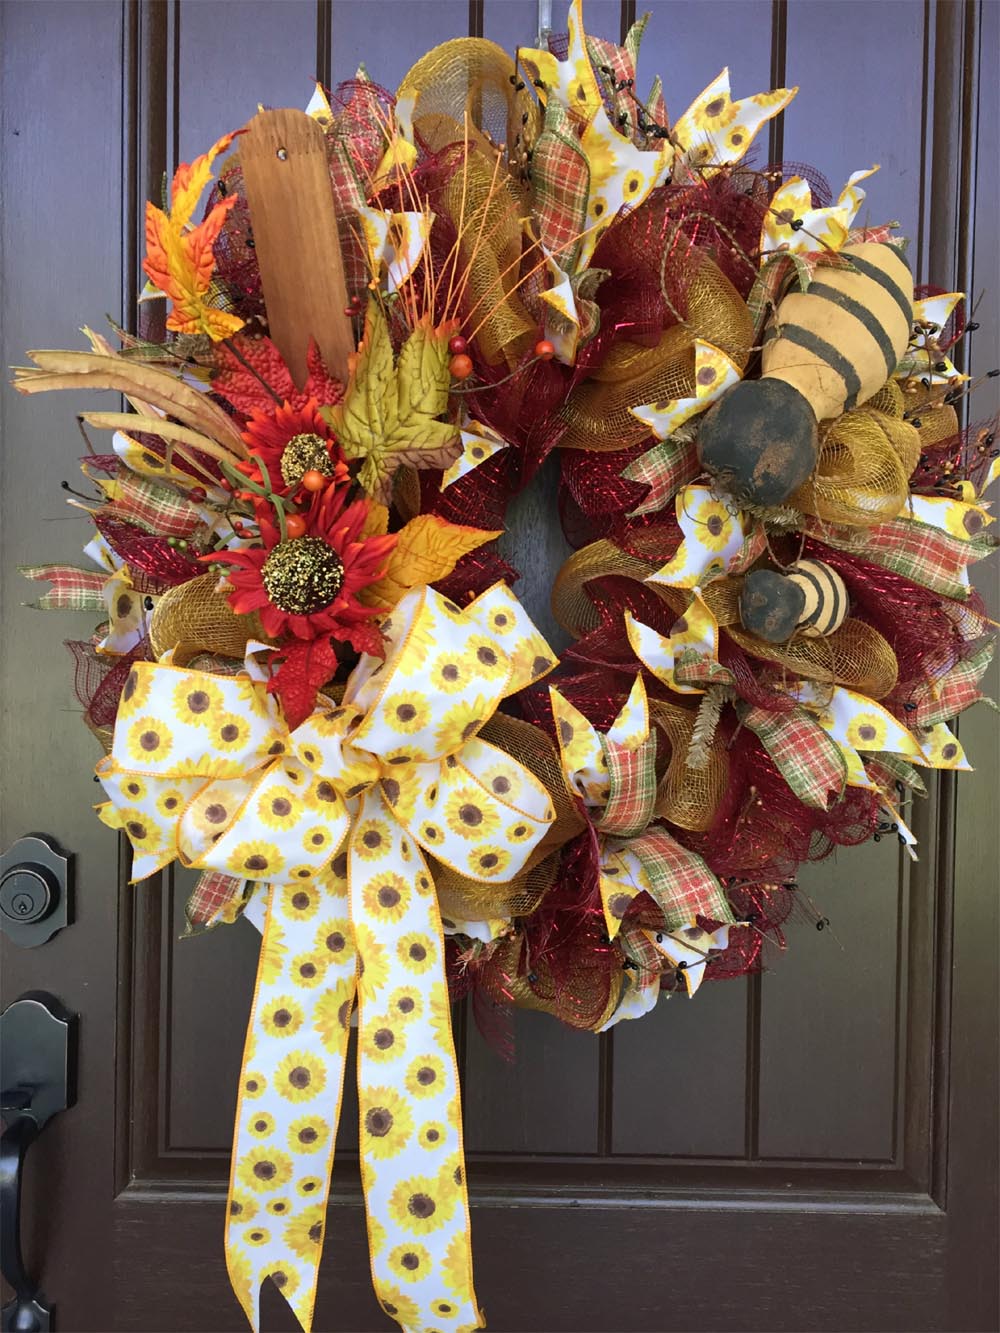 2017 Autumn Wreath with Bees Tutorial